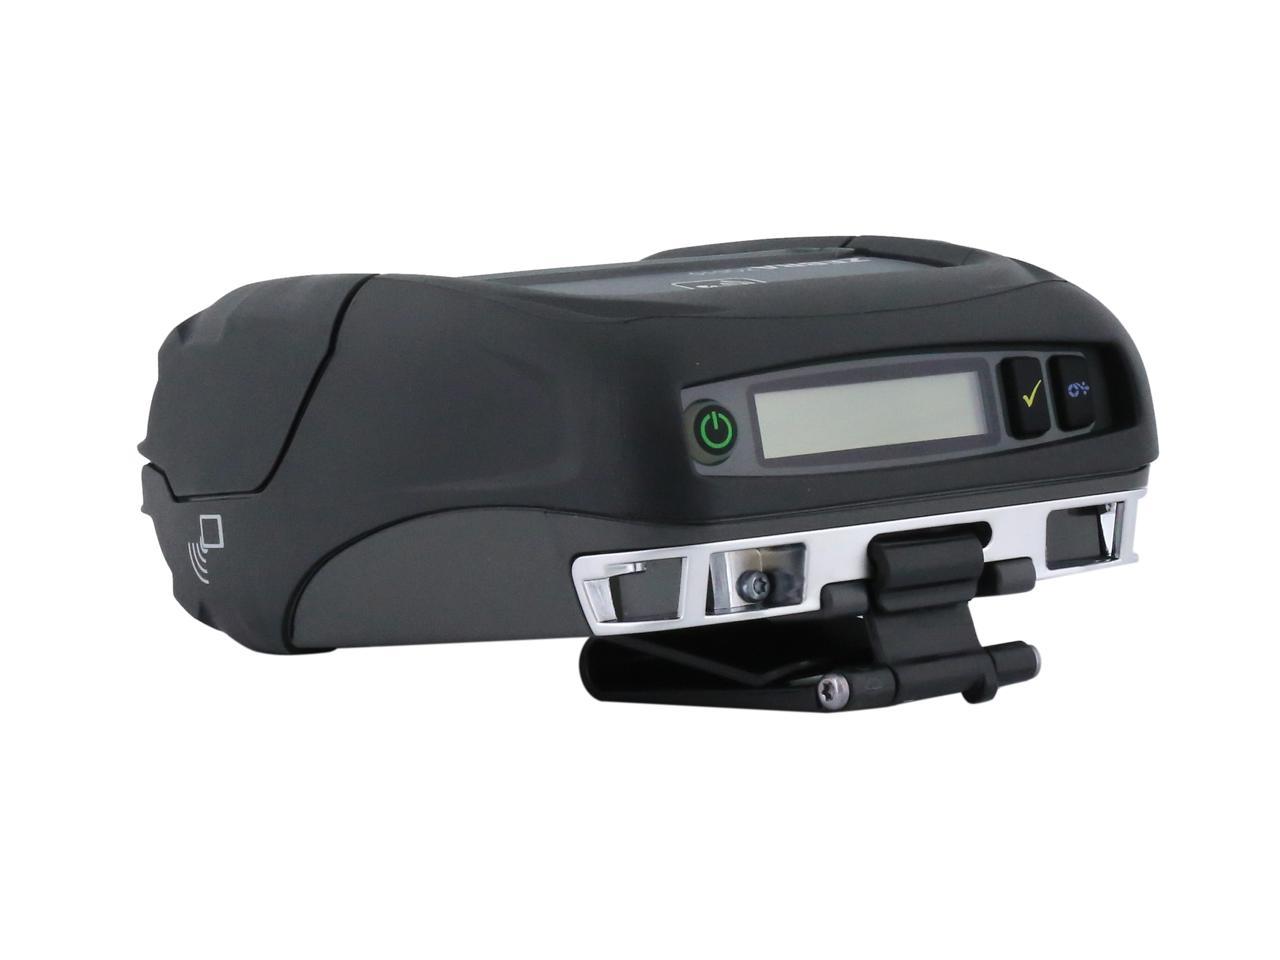 Zebra Zq510 3 Mobile Direct Thermal Receipt And Label Printer 203 Dpi Bluetooth 40 Linered 0640